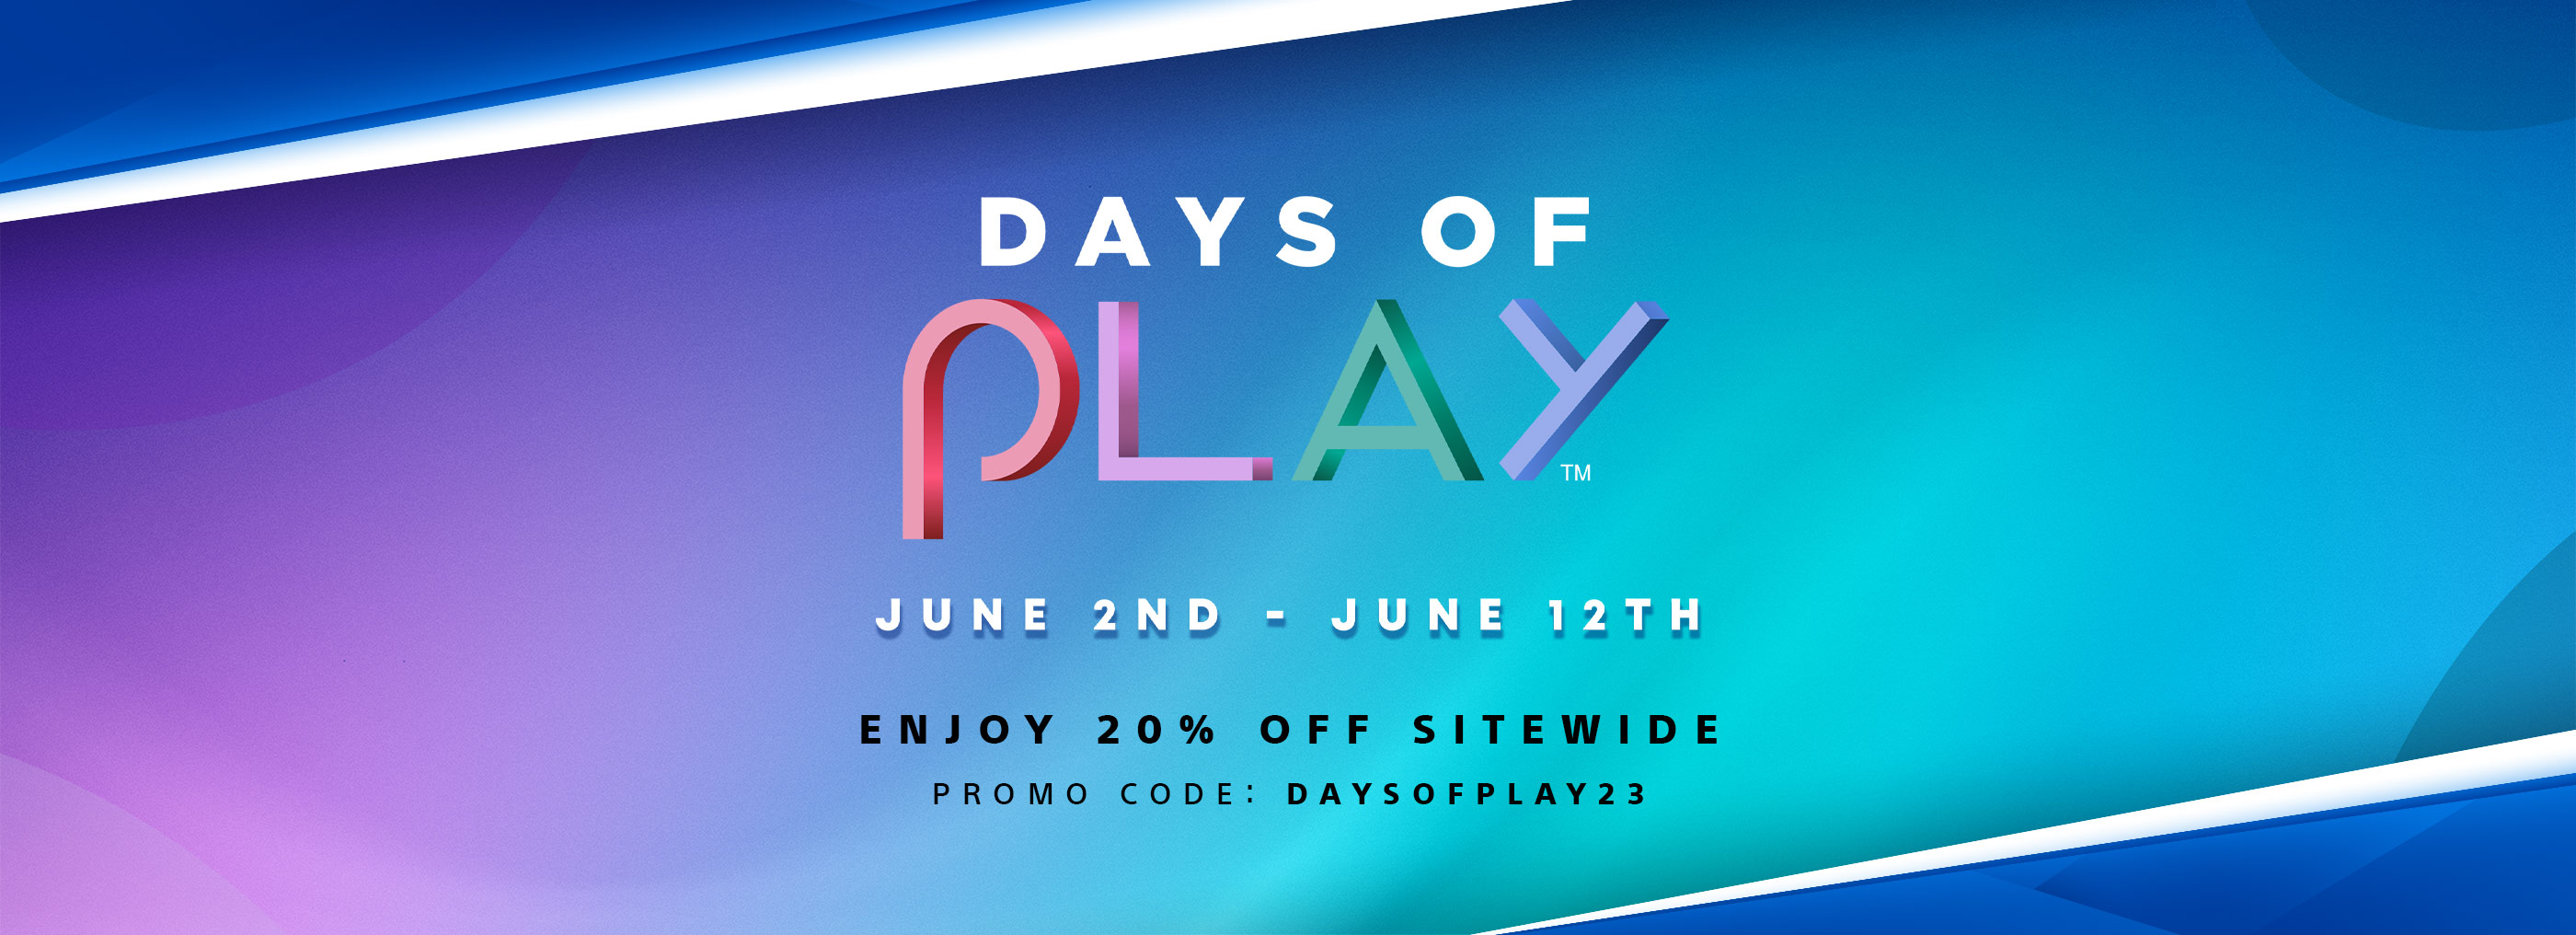 Celebrate Days of Play with 20% off sitewide!